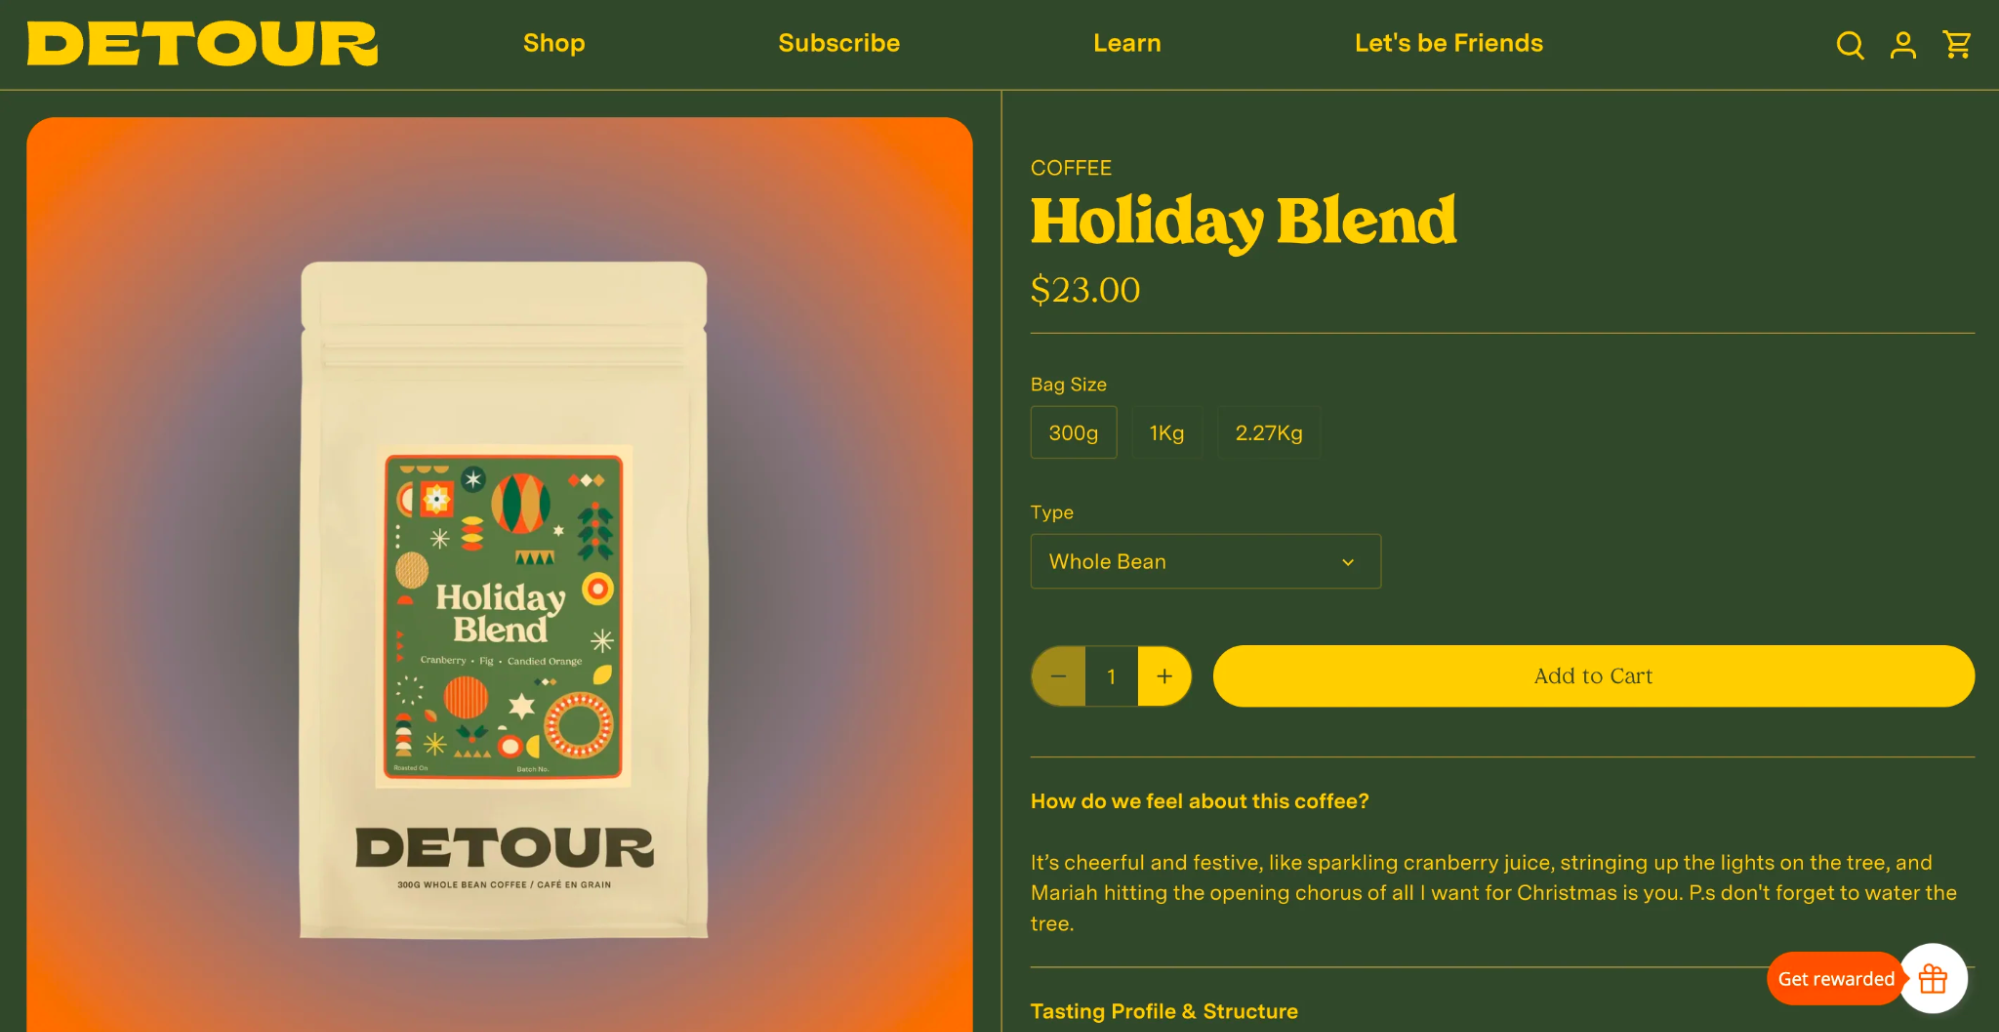 Coffee brand Detour’s holiday blend product launched for the holiday season